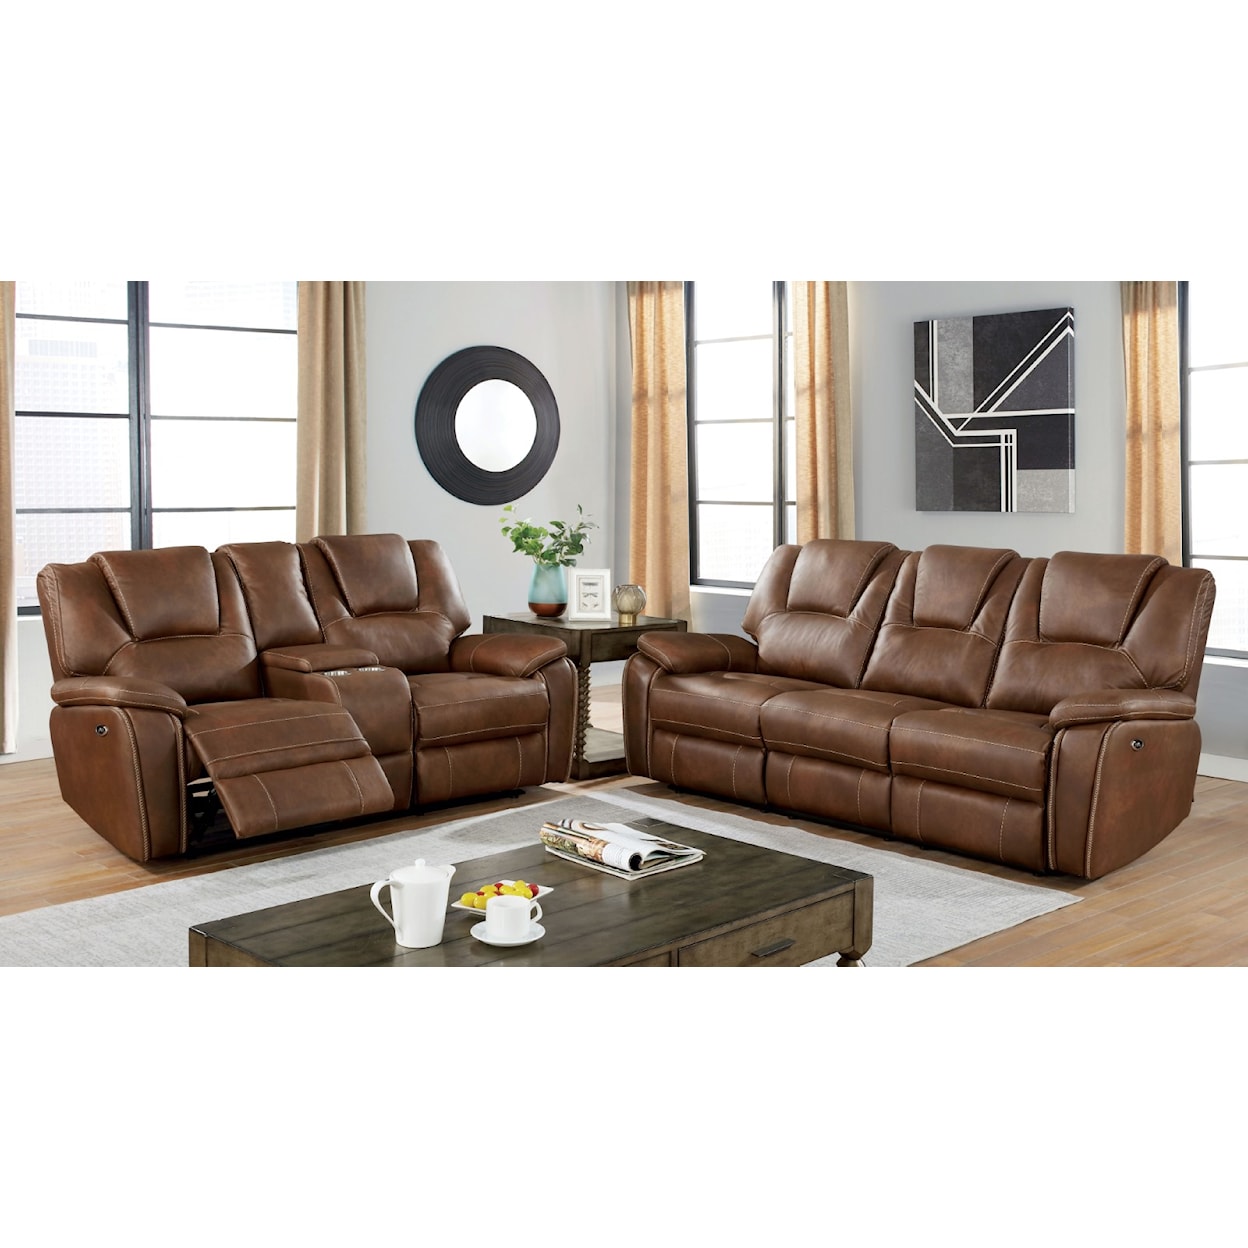 Furniture of America Ffion Power Reclining Sofa and Loveseat